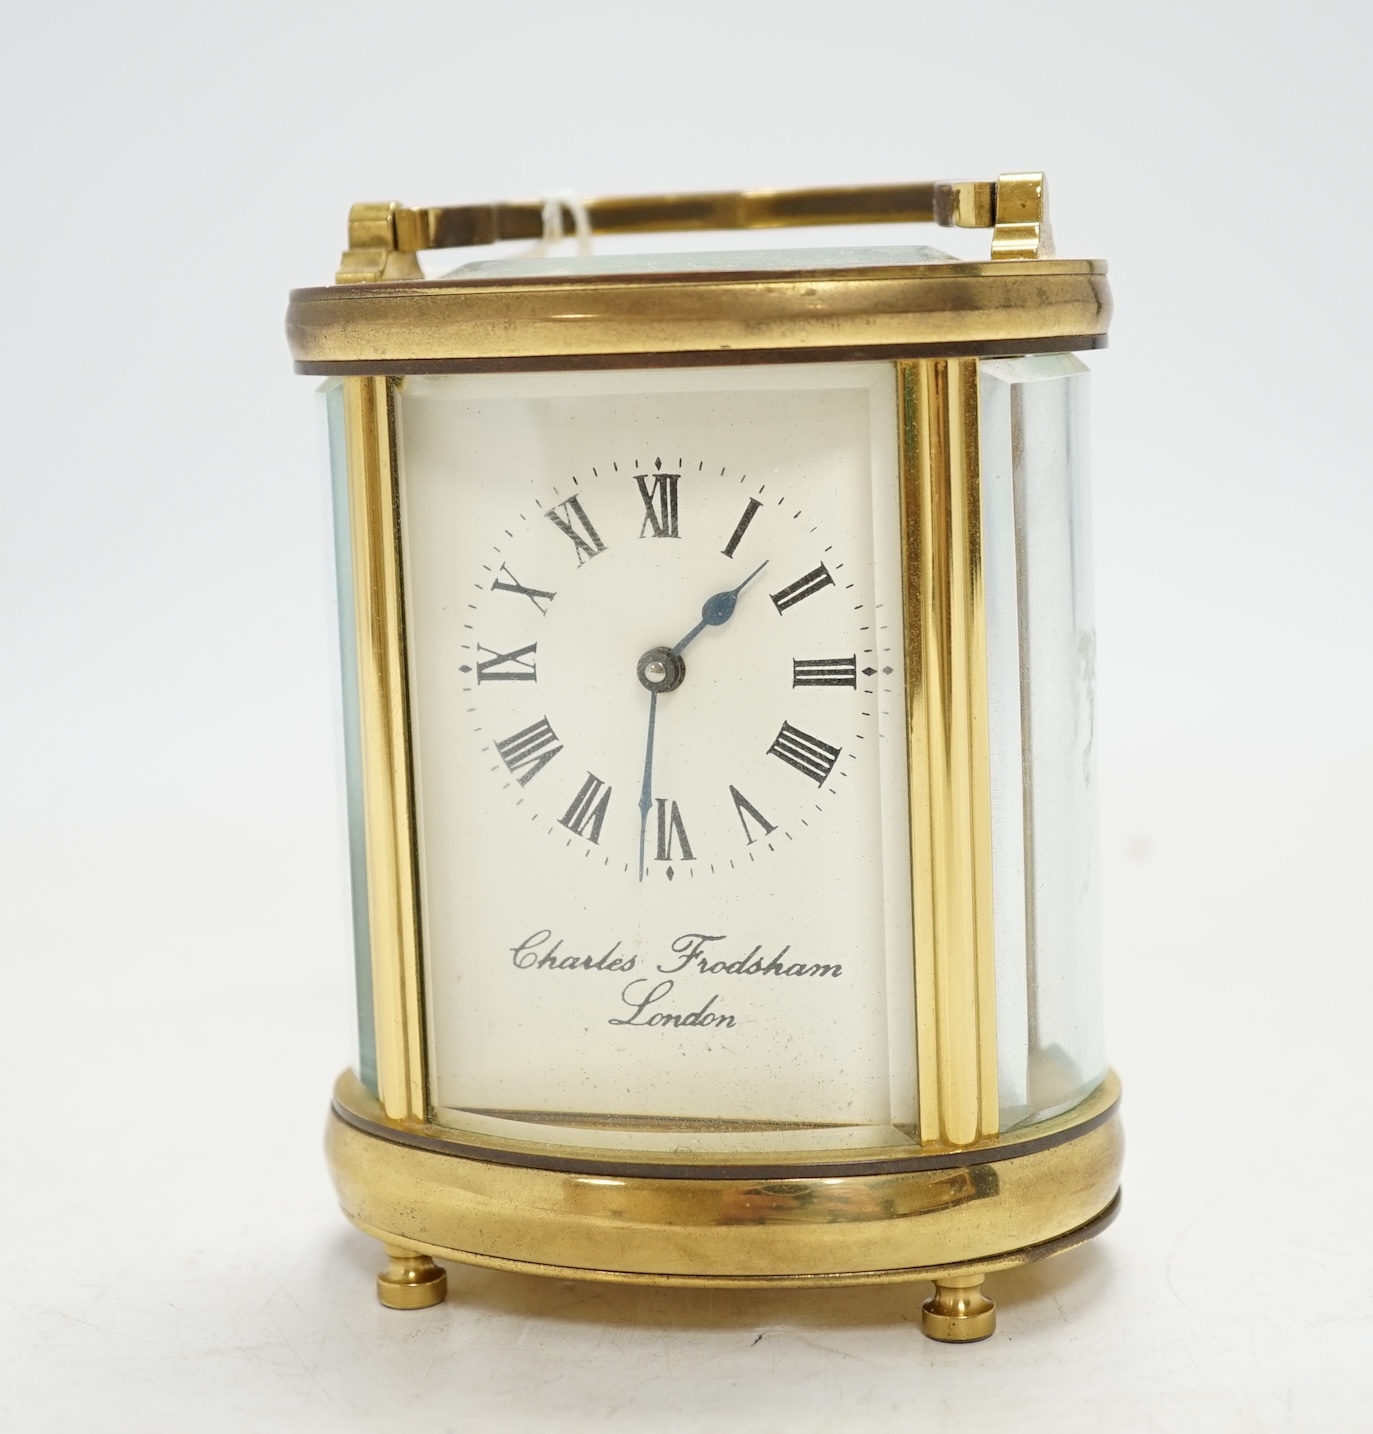 A carriage timepiece signed Charles Frodsham to the dial, with Royal Household connection, 12cm. Condition - fair, not tested